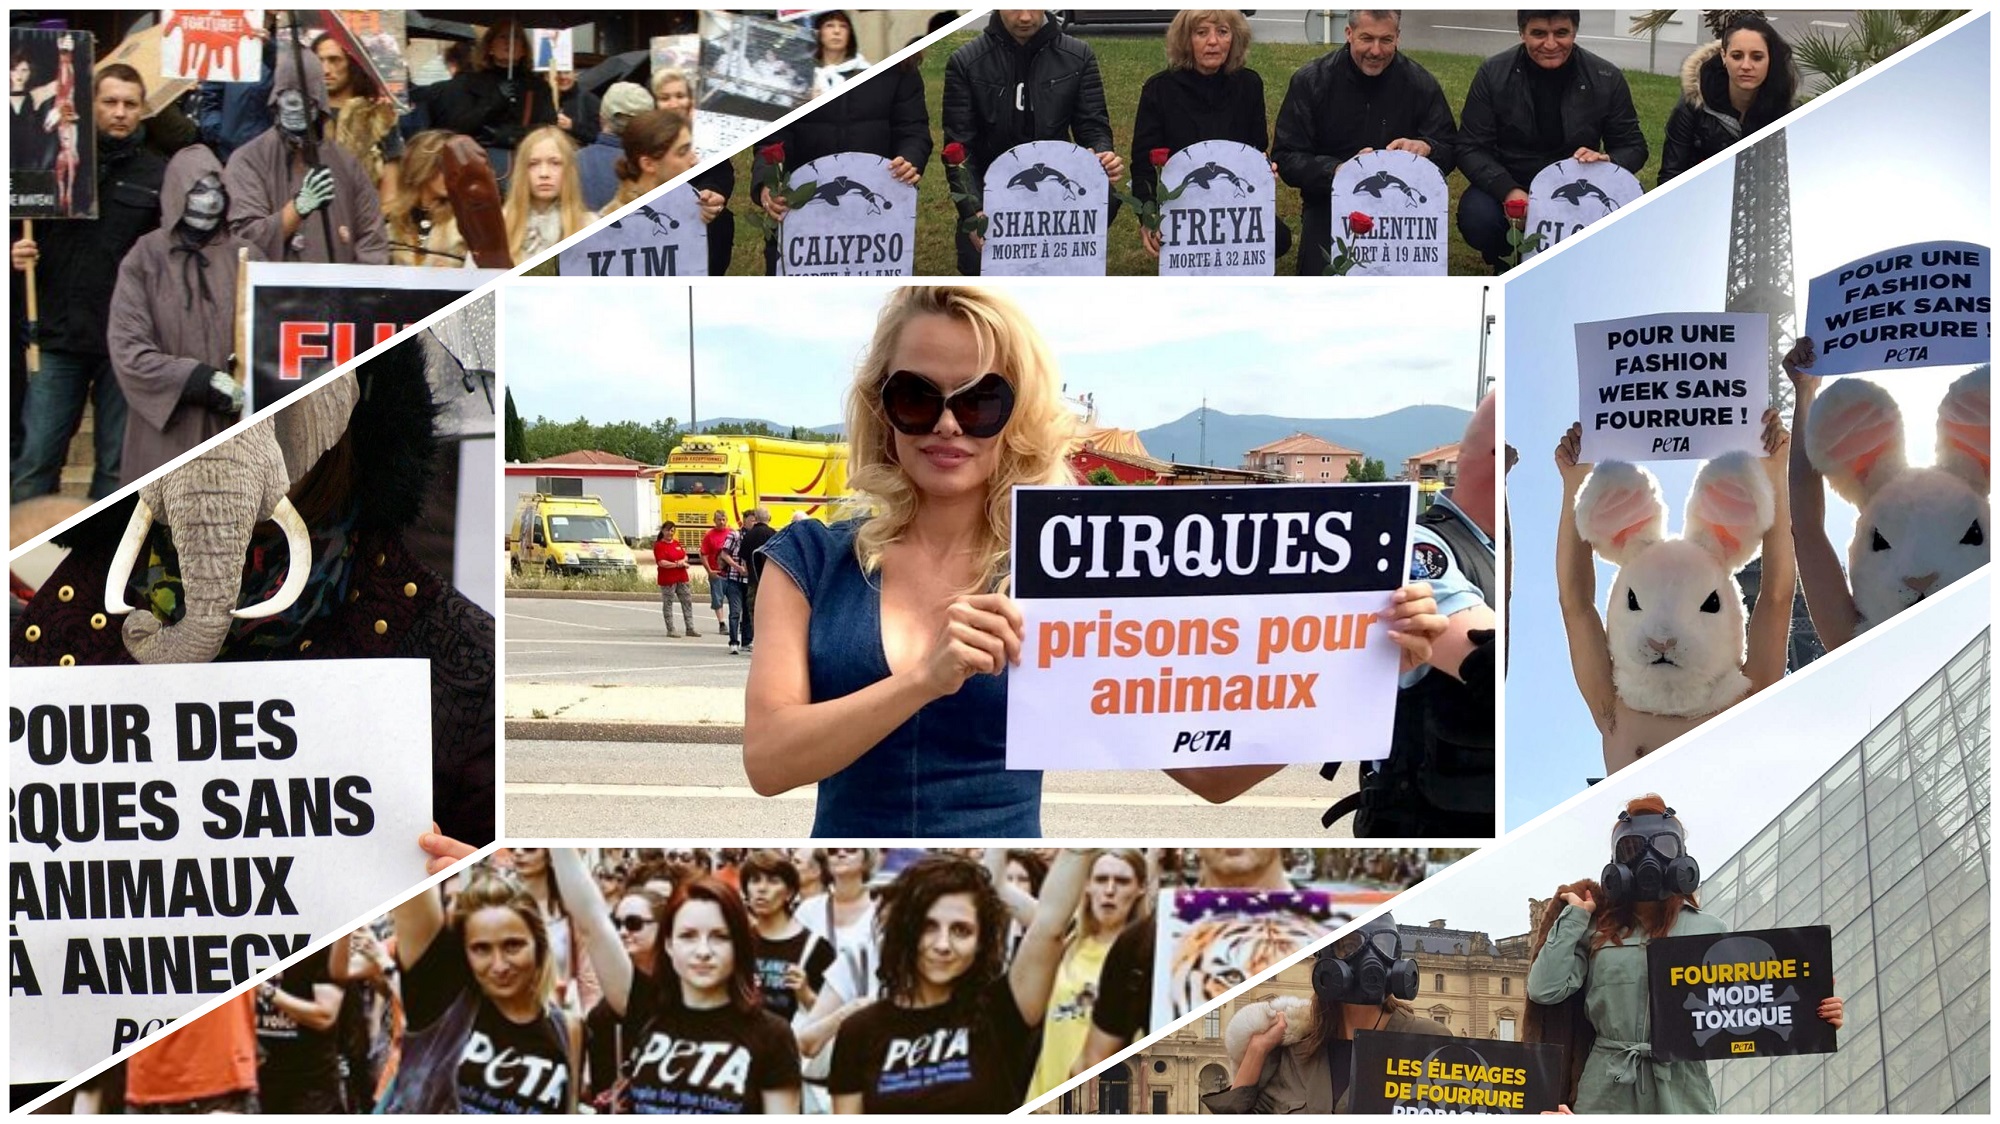 Historic! France to Shut Down Mink Farms, Dolphin Captivity and Wild Animal Circuses